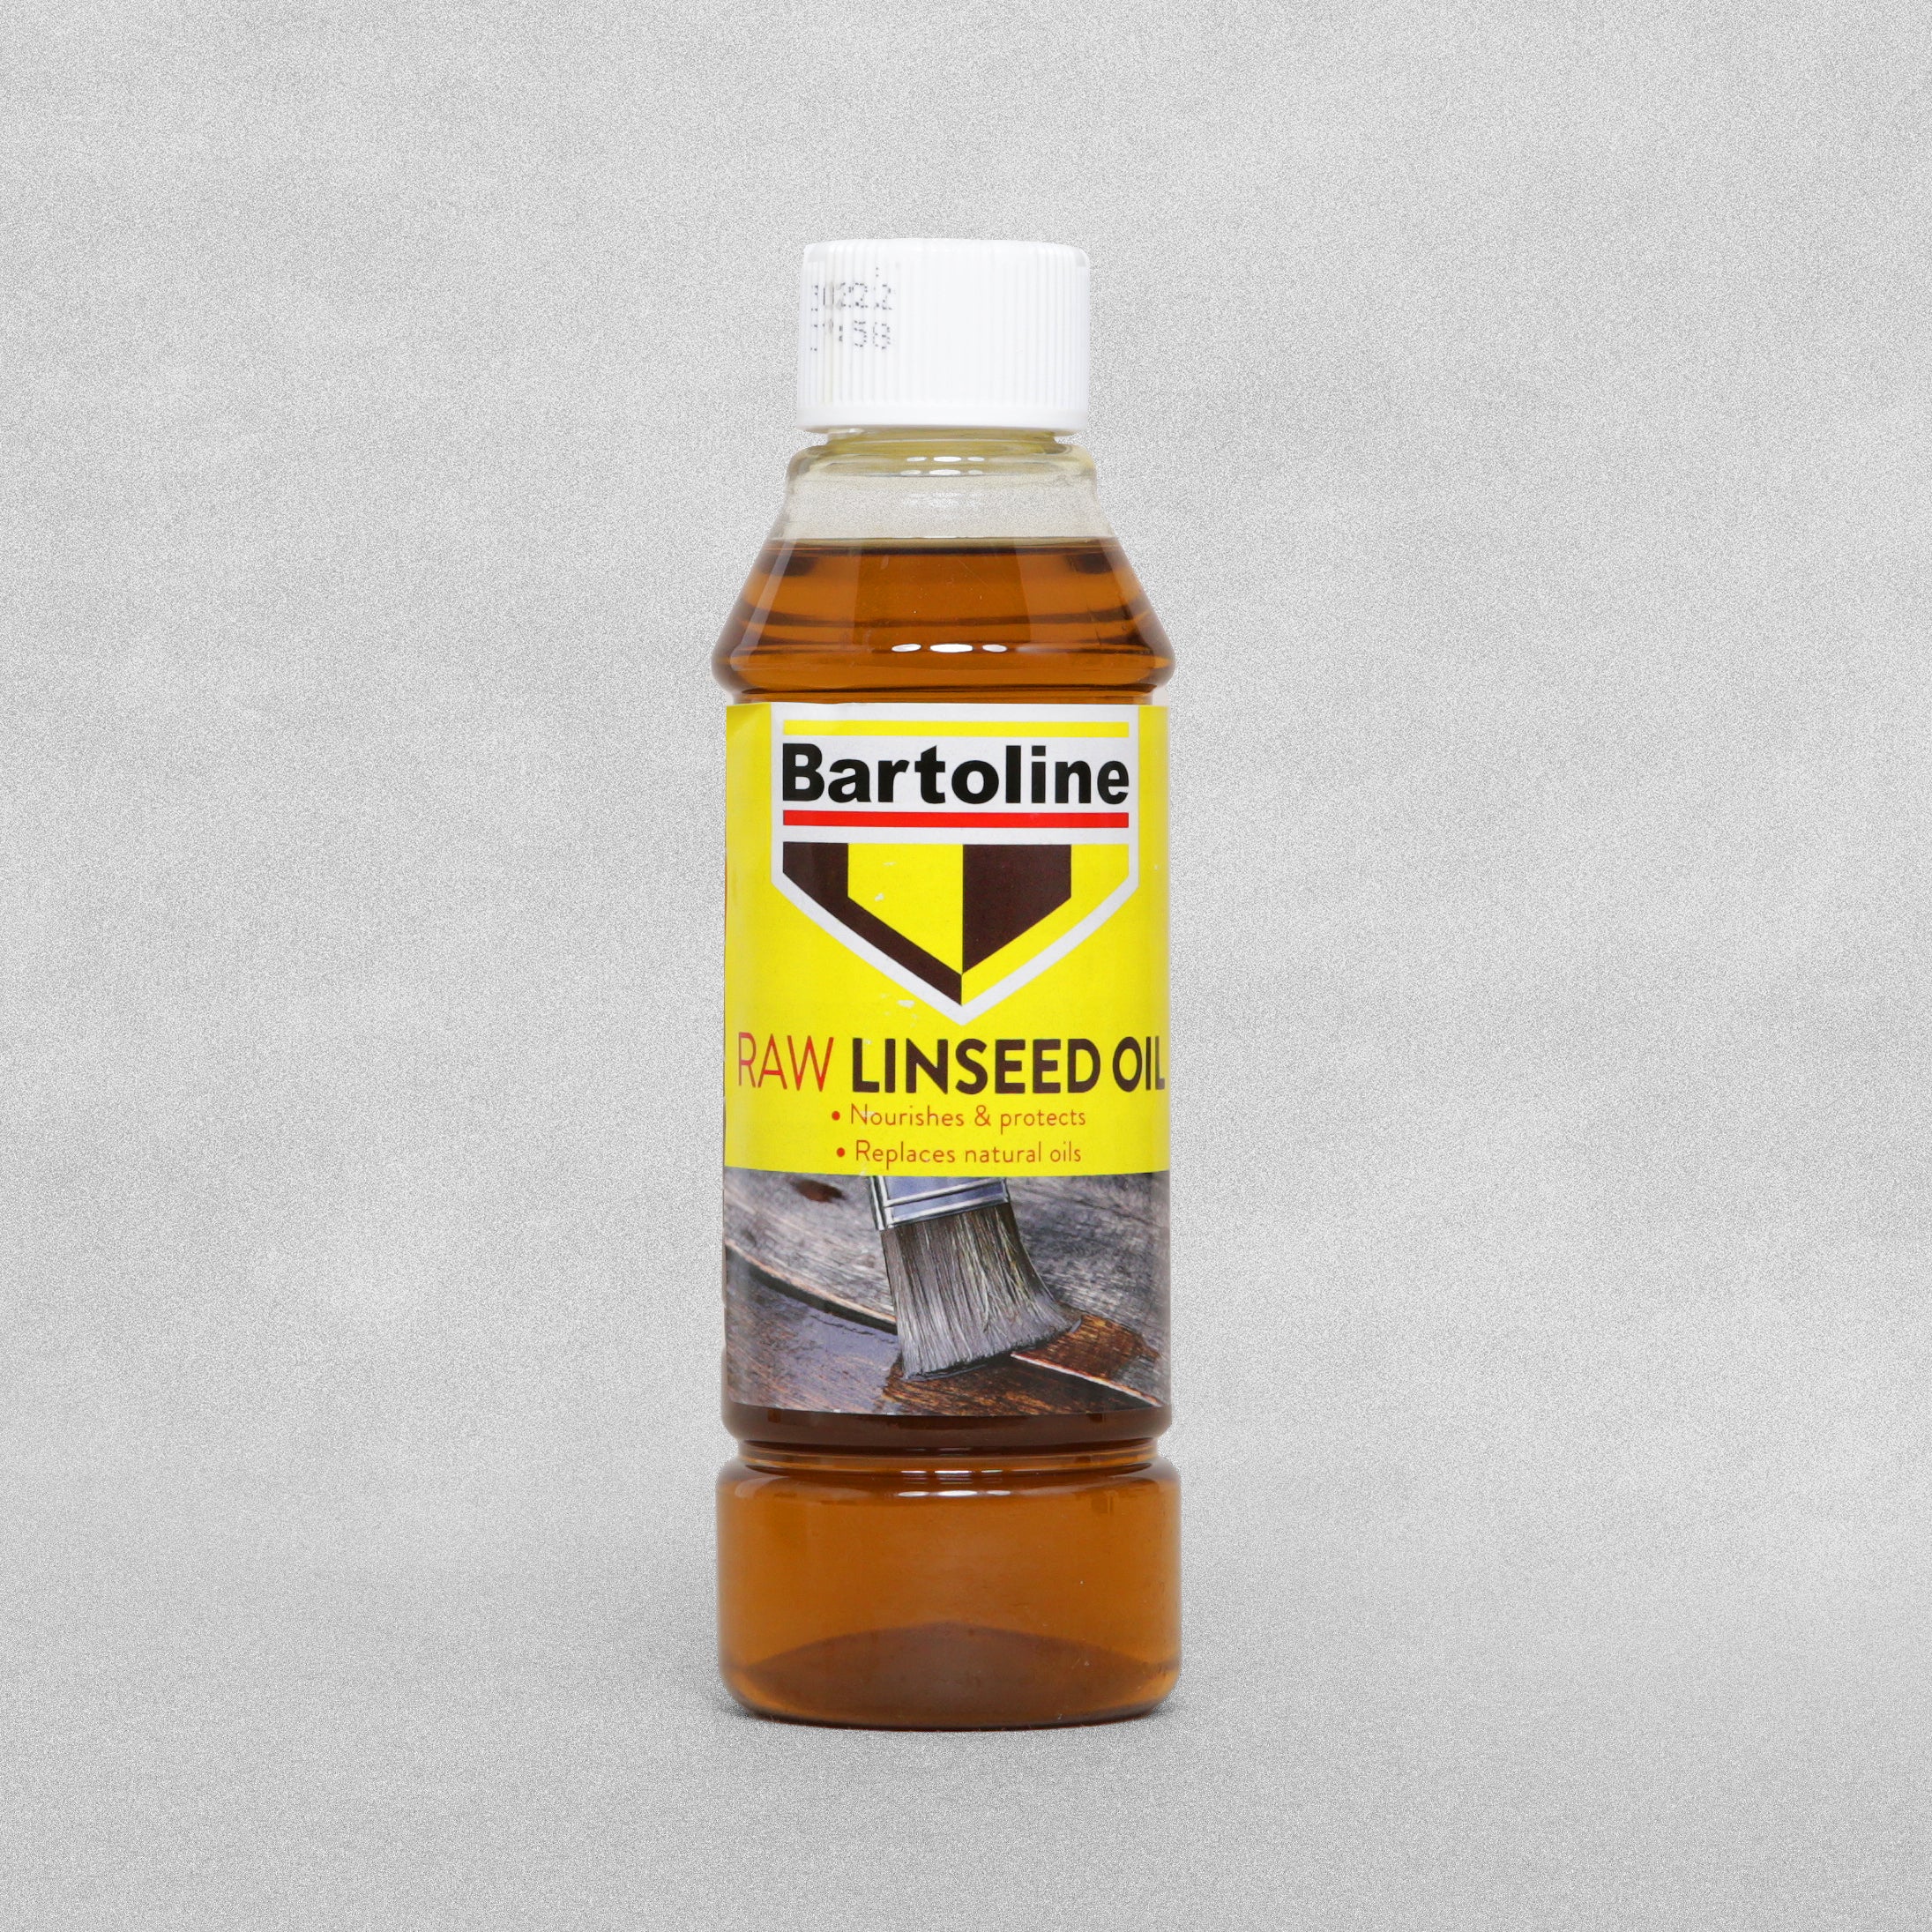 Bartoline Natural Oil Replacement Raw Linseed Oil - 250ml